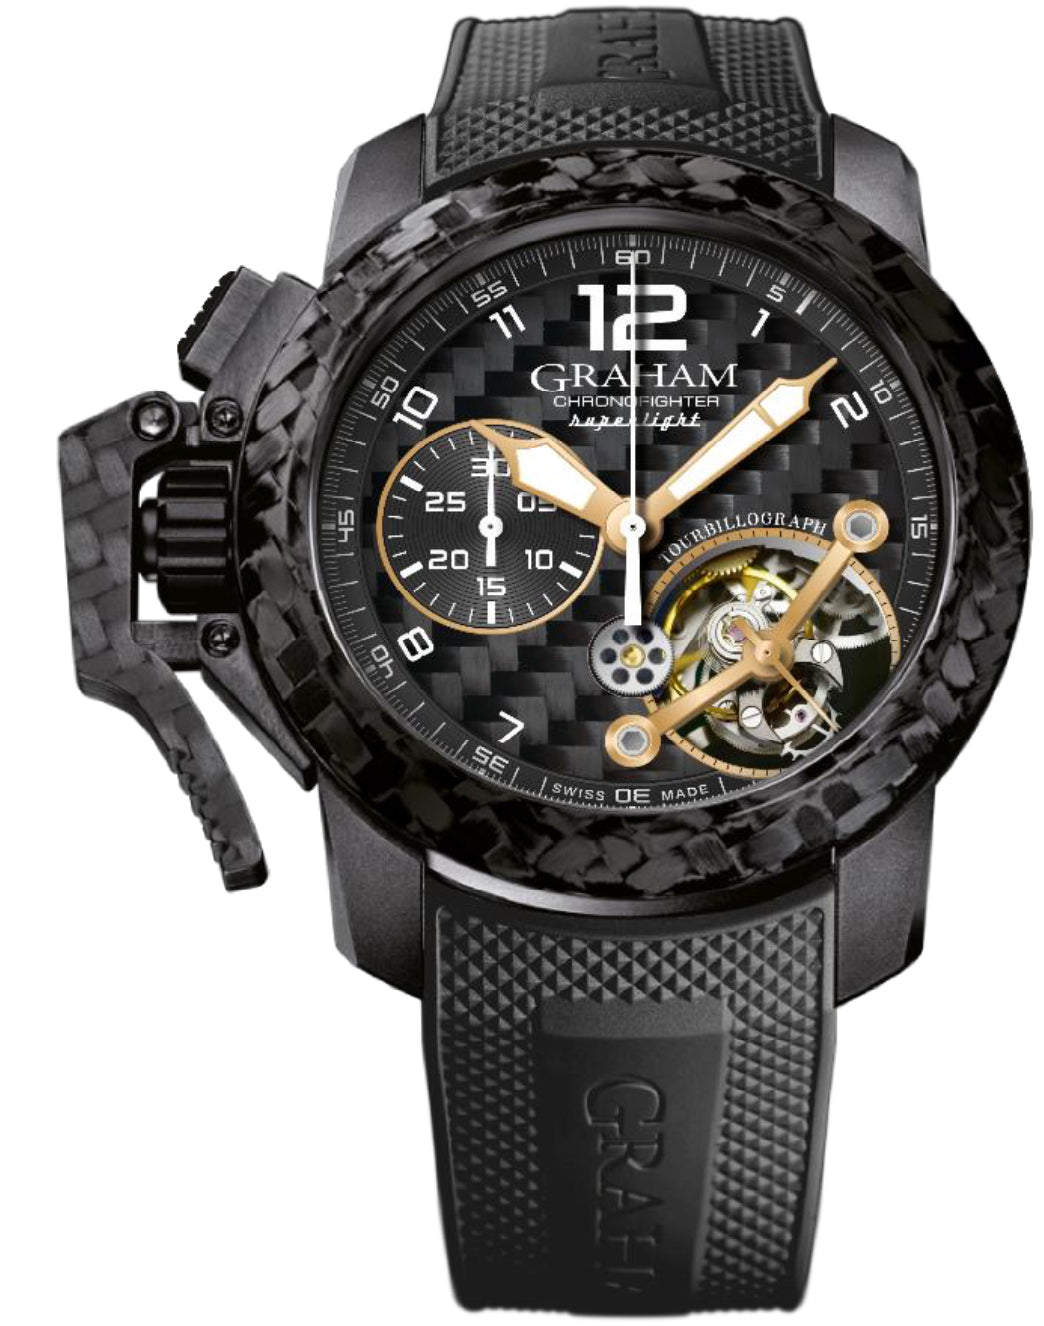 Graham Watch Chronofighter Superlight Carbon Tourbillograph Limited Edition